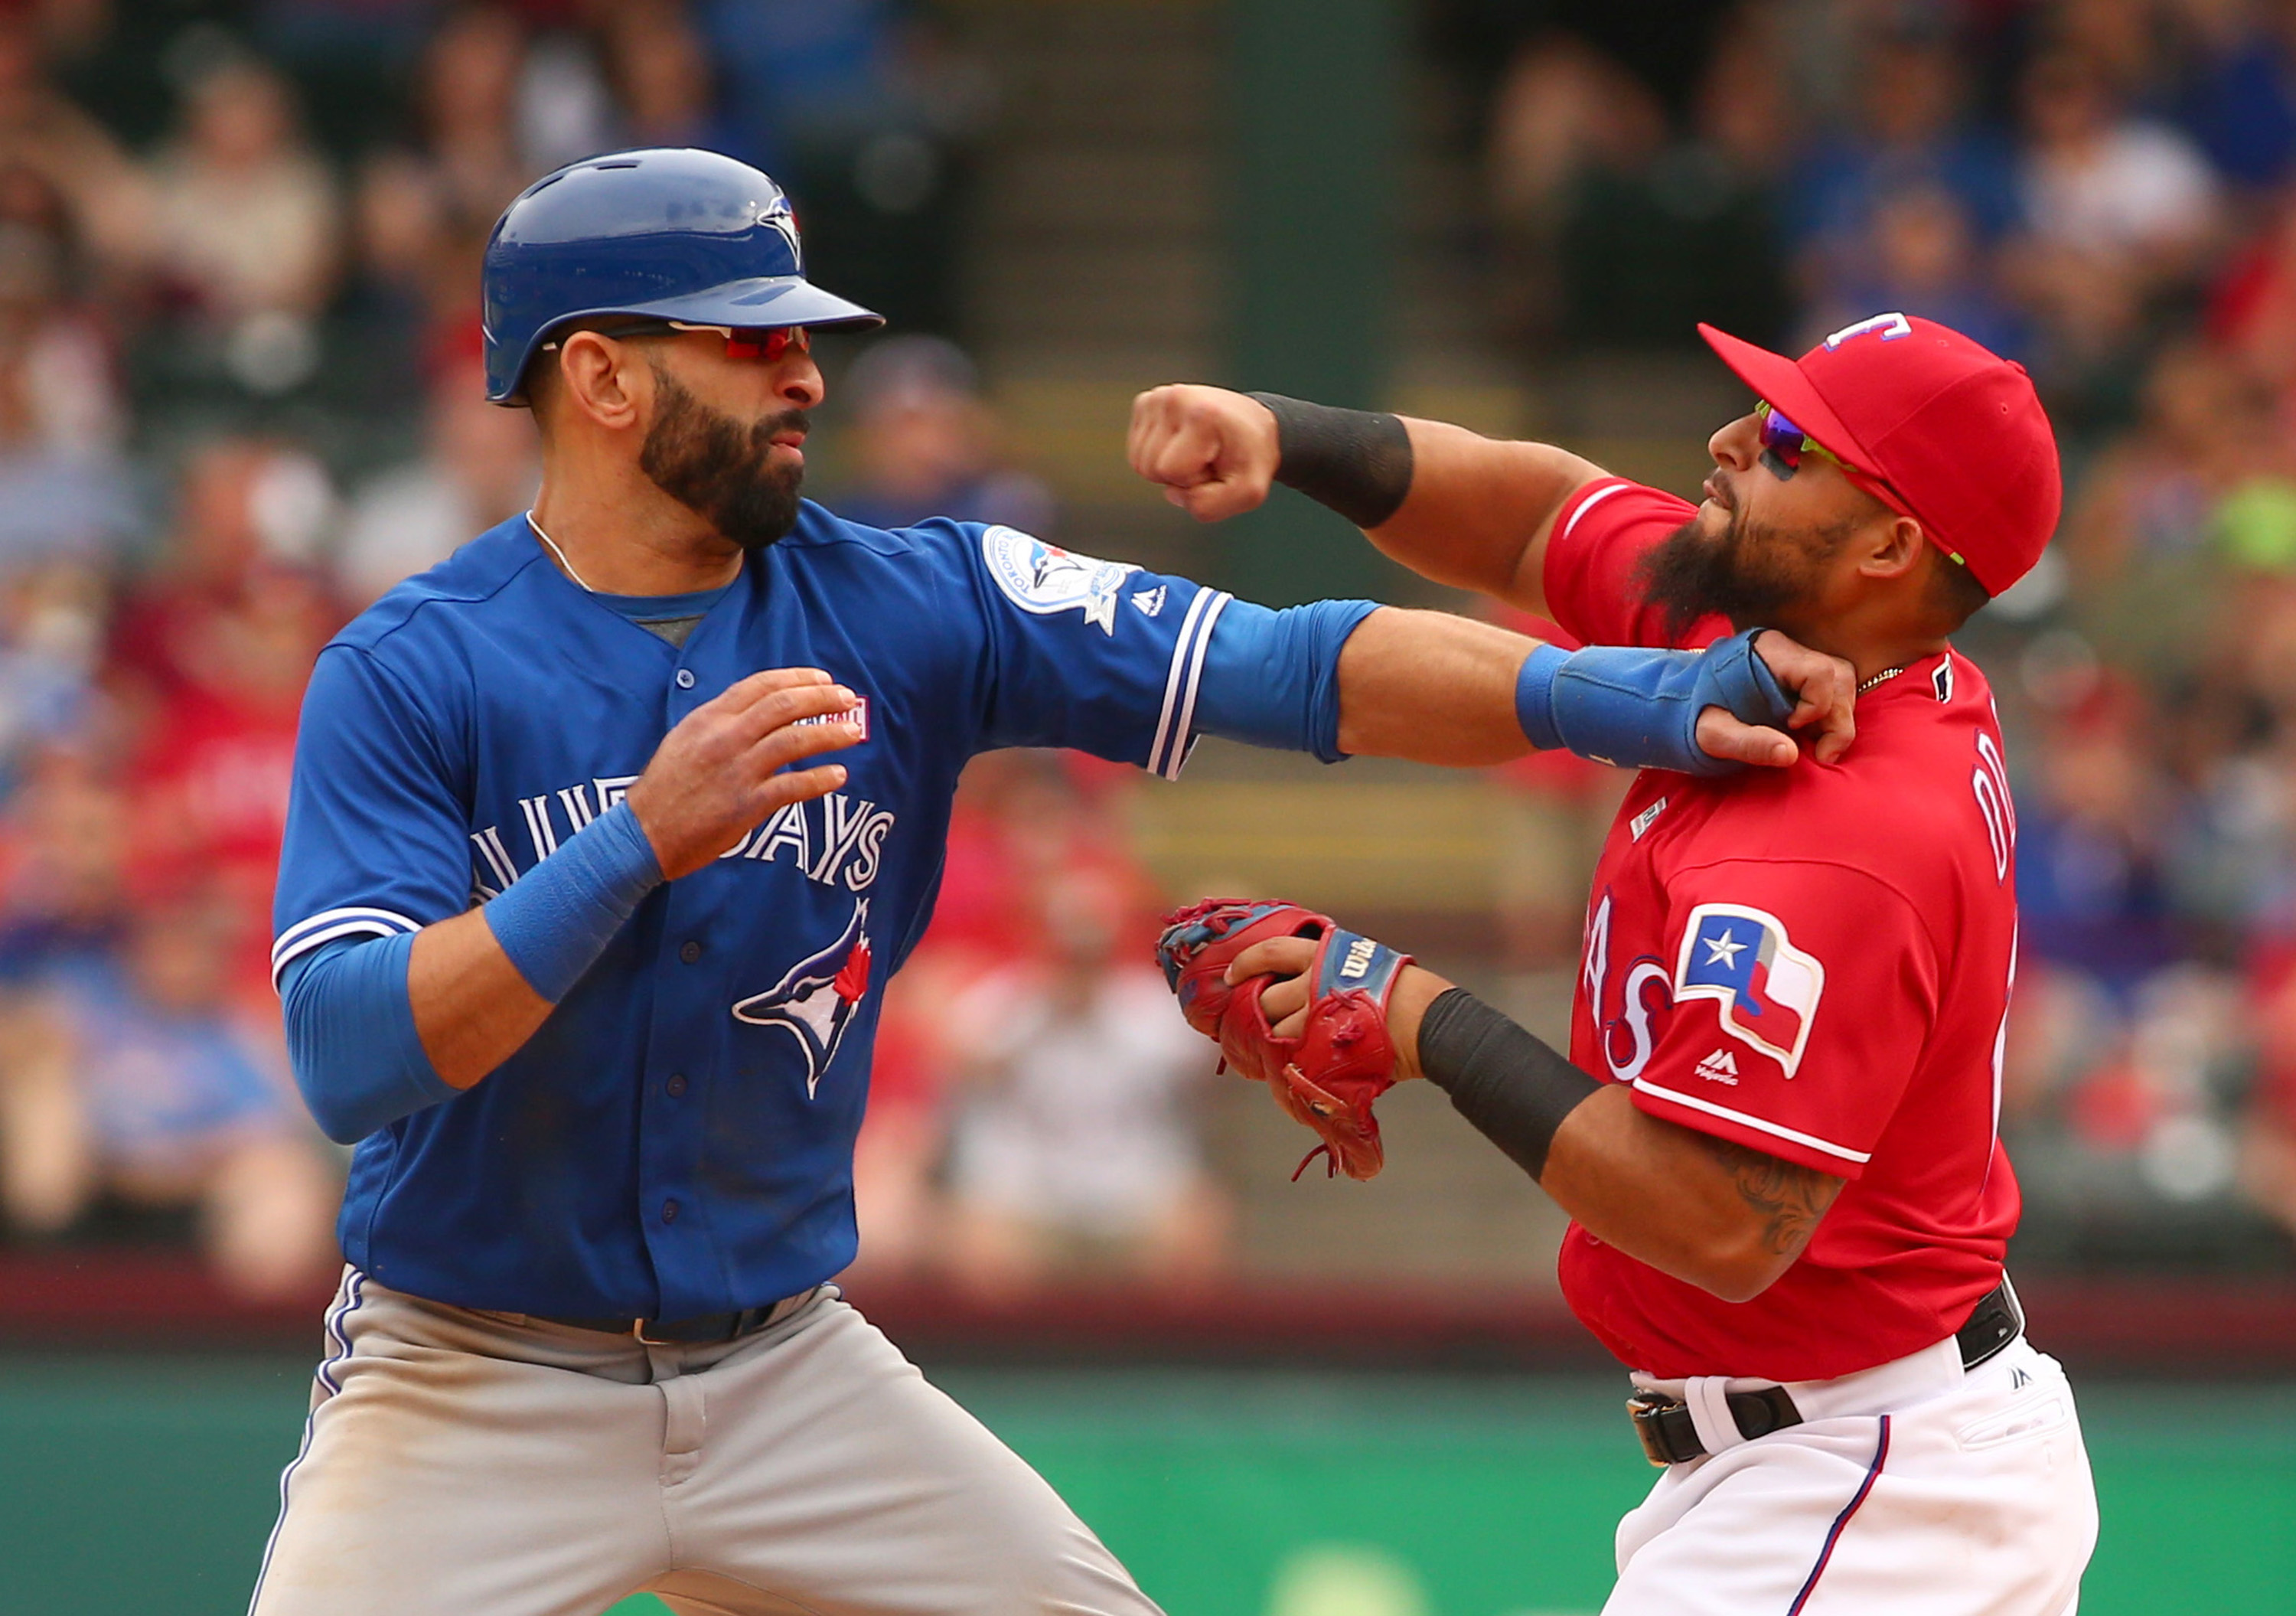 Toronto Blue Jays Jose Bautista (19) gets hit by Texas Rangers second baseman Rougned Odor (12) after Bautista slid into second in the 8th inning at Globe Life Park on May 15, 2016 in Arlington, Texas. The Rangers won 7-6. (Richard W. Rodriguez/Fort Worth Star-Telegram/TNS)